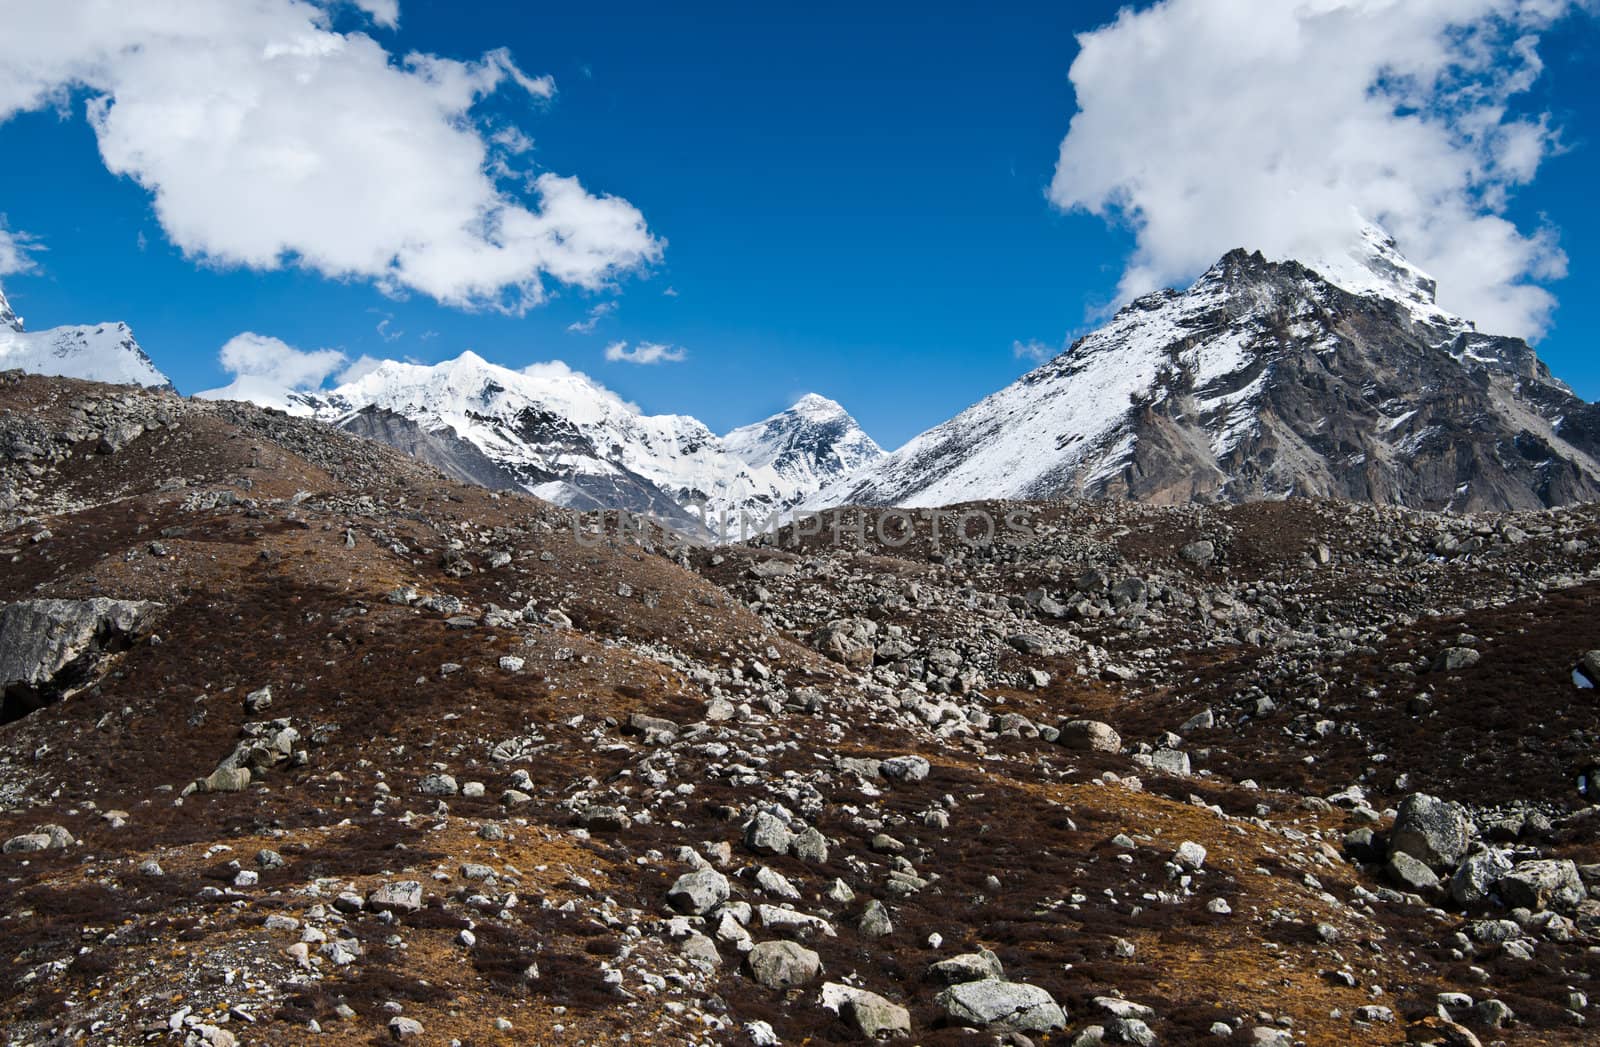 Peaks and moraine near Gokyo in Himalayas. (Shot at a height 4800 m)